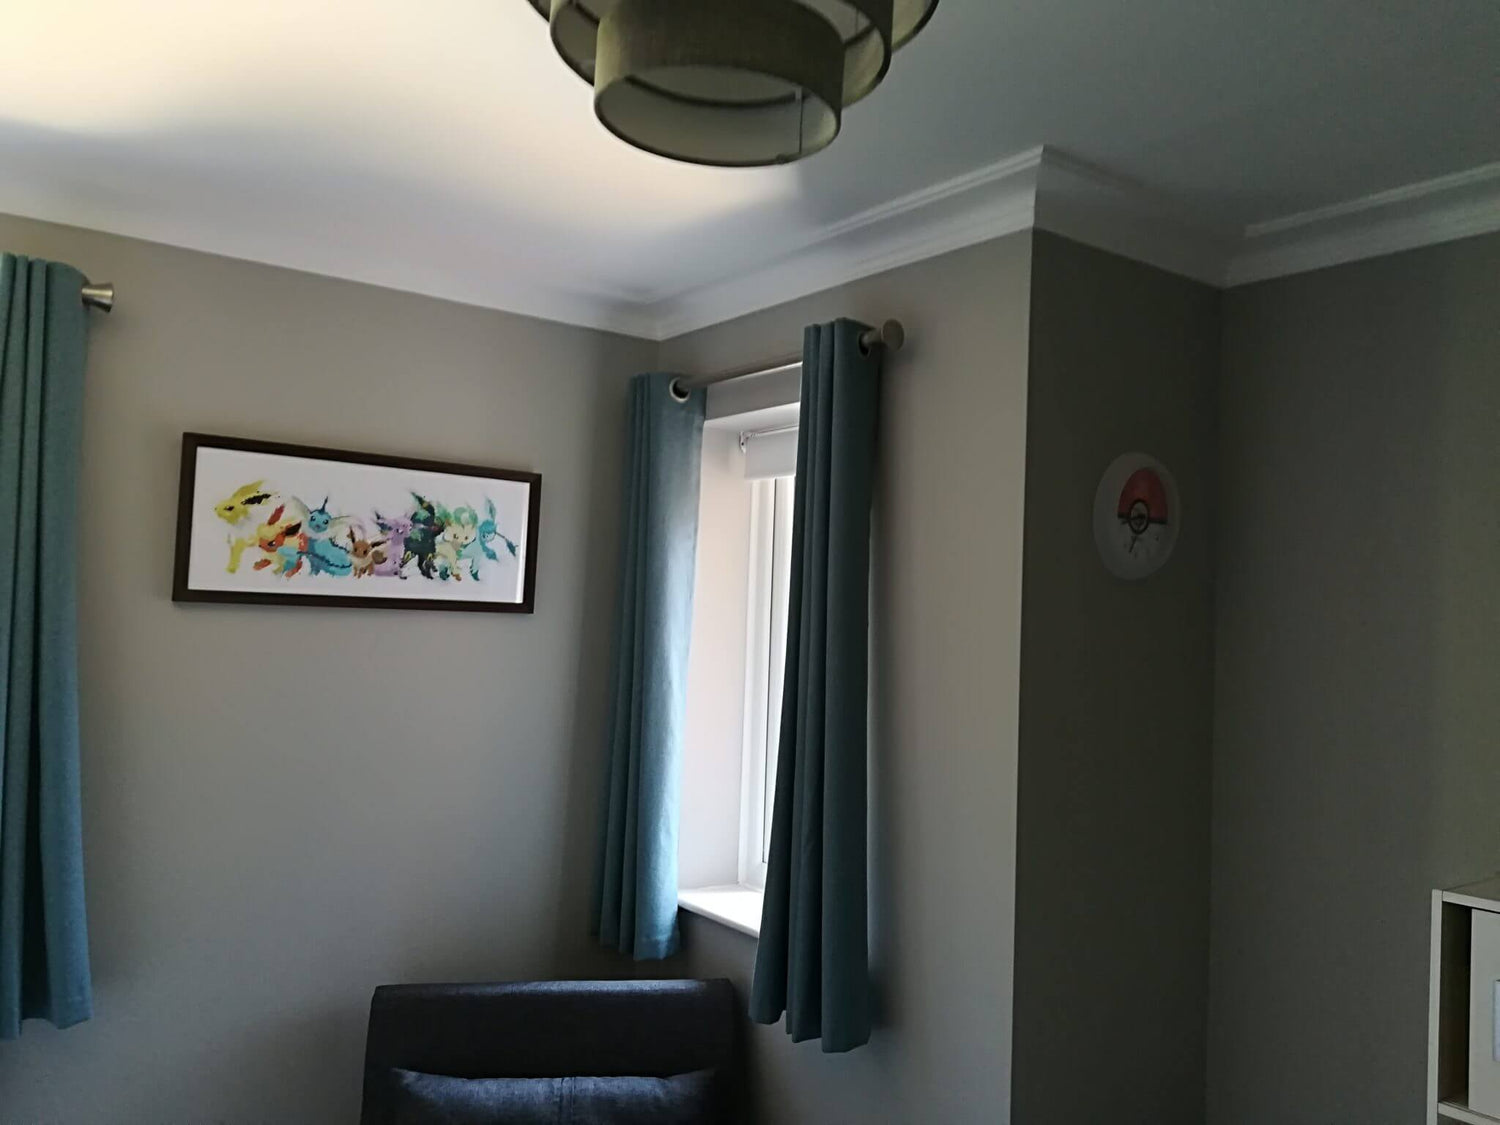 C3017 - Classic Coving installed above a window